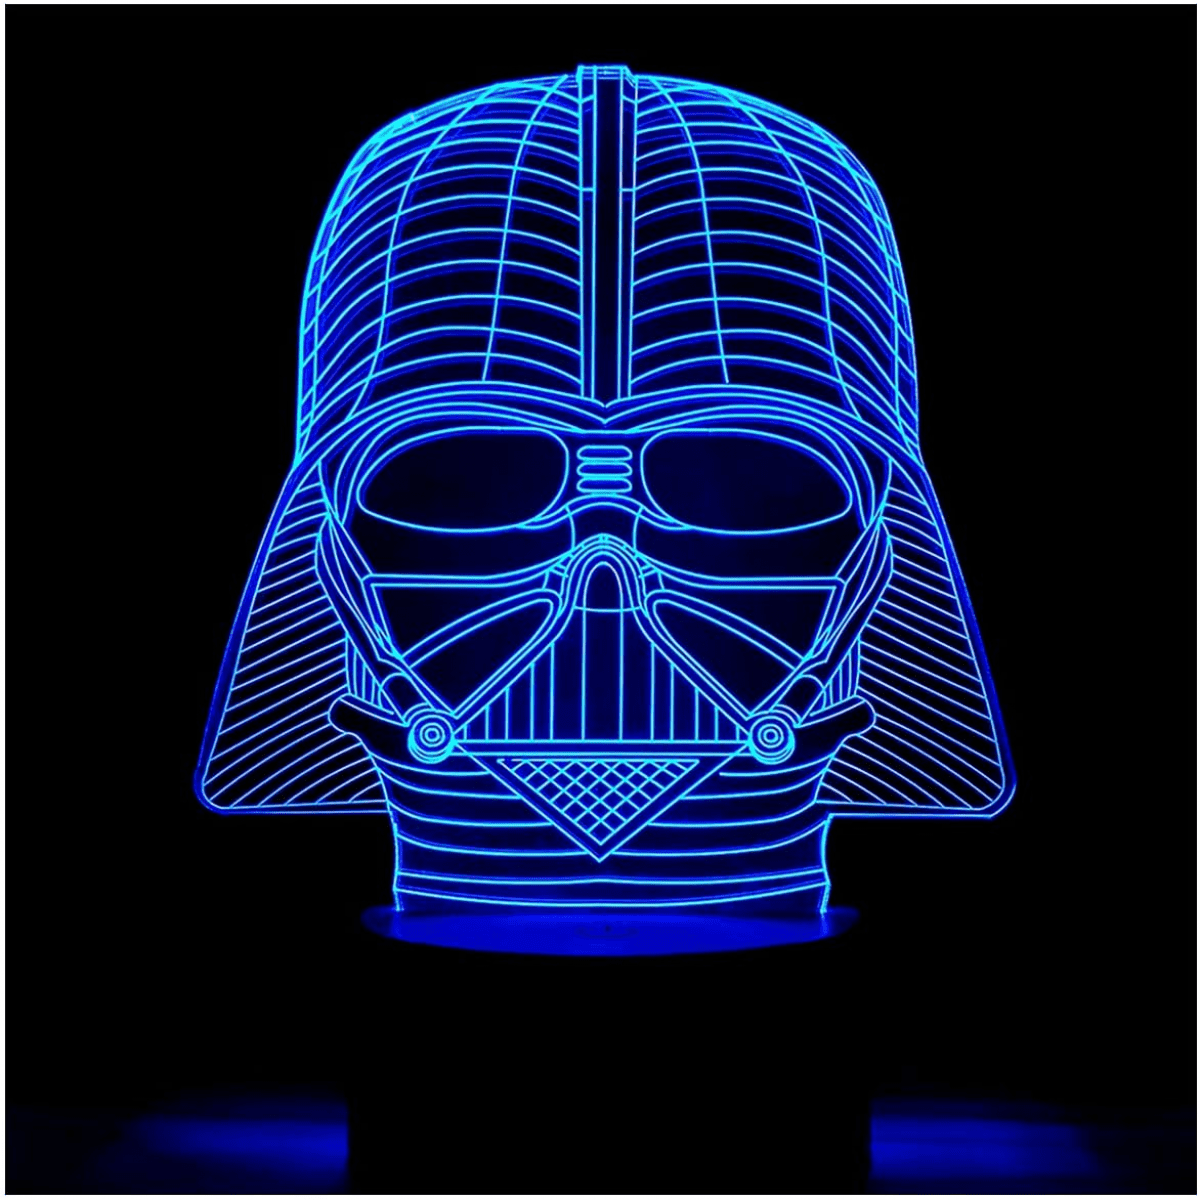 LED 3D Optical Illusion Smart 7 Colors Night Light Desk Lamp with USB Cable Darth Vader 